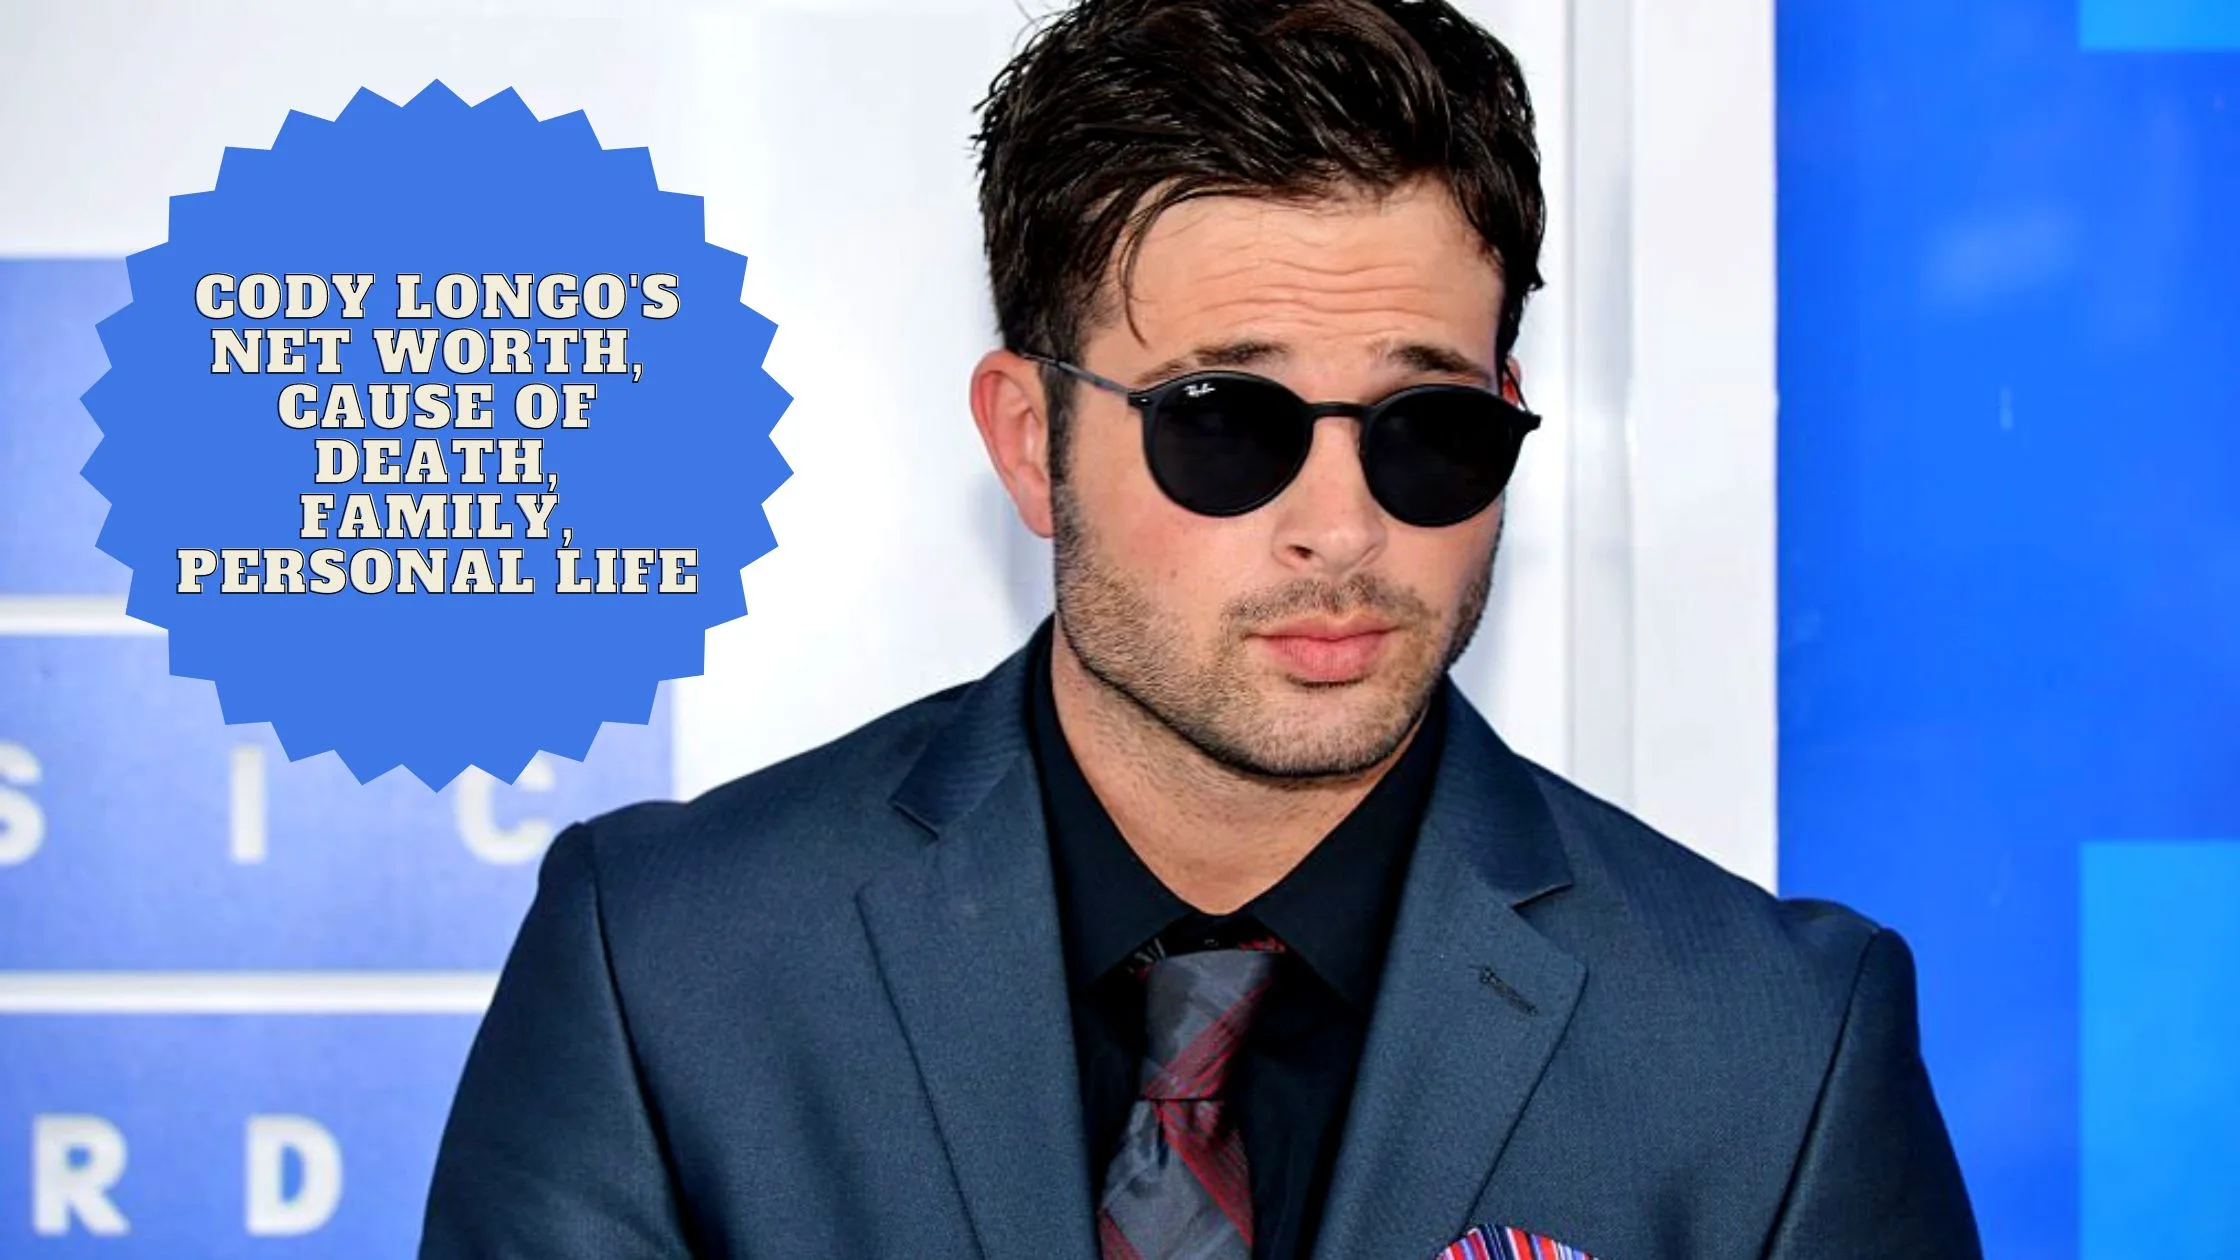 Cody Longo's Net Worth, Cause Of Death, Family, And Personal Life